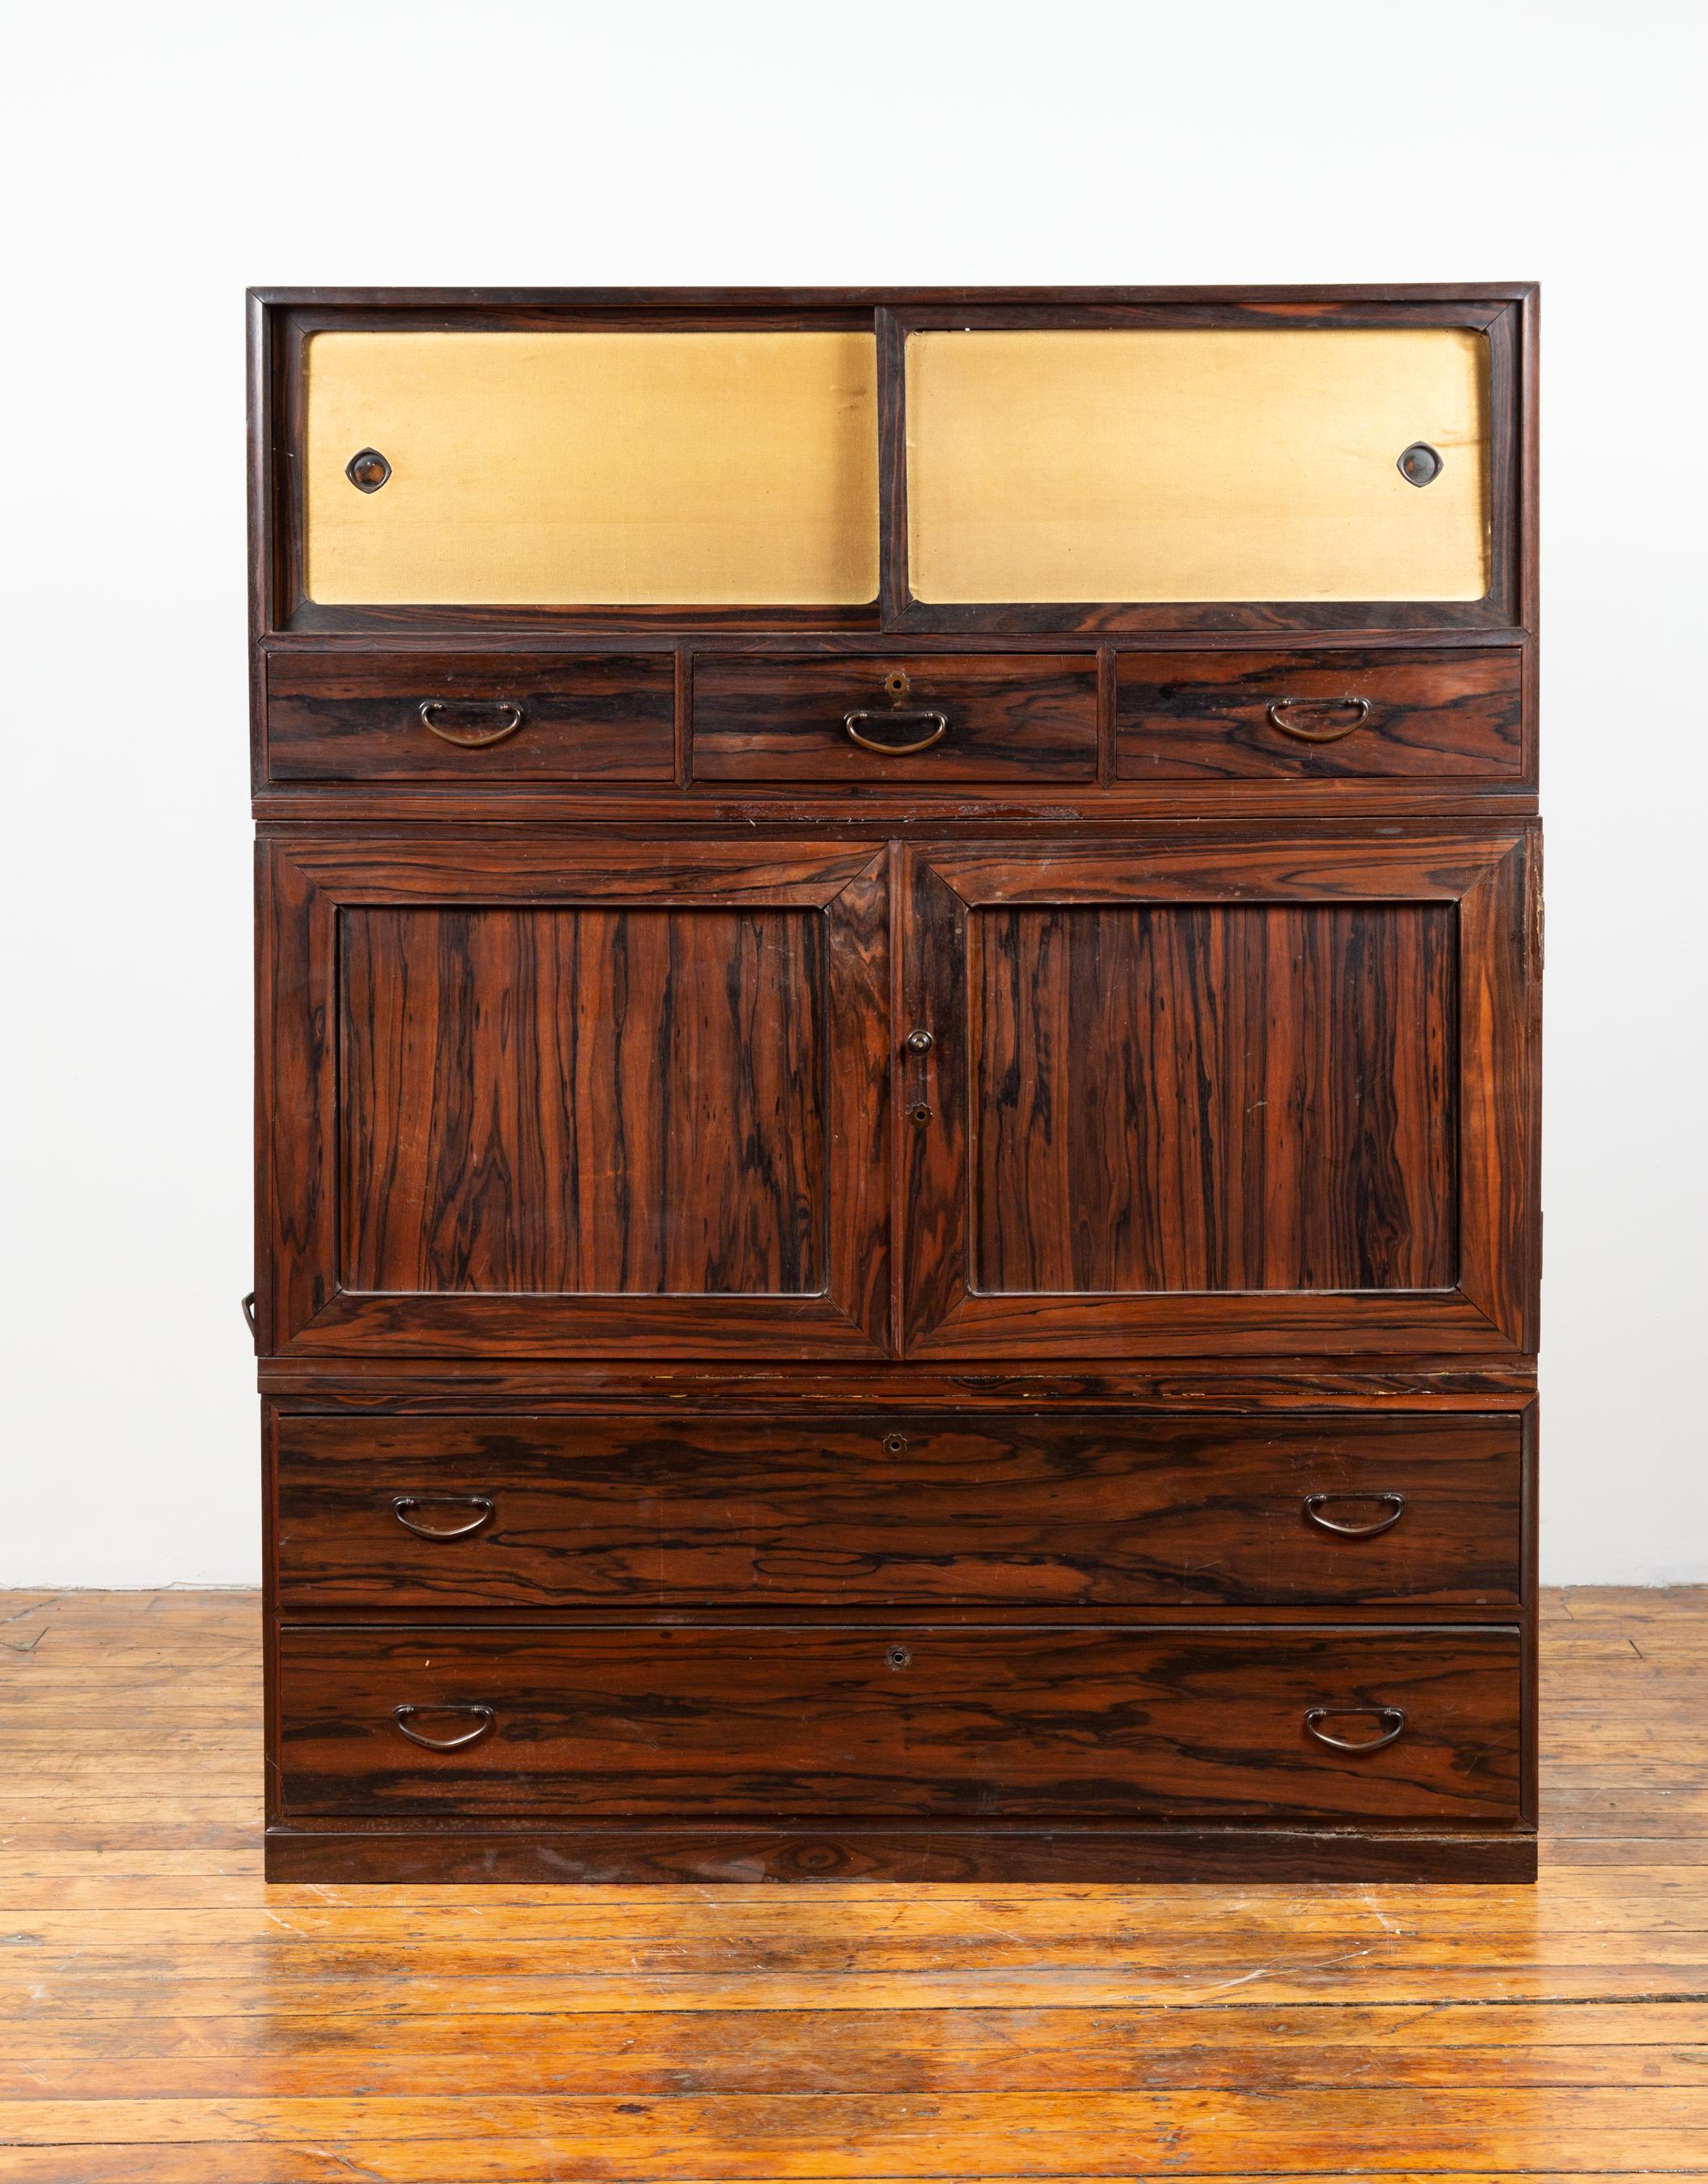 An Japanese mulberry wood kimono cabinet from the 20th century, with sliding doors and drawers. Born in Japan during the 20th century, this exquisite cabinet charms us with its richly grained mulberry wood and convenient features. Presenting an